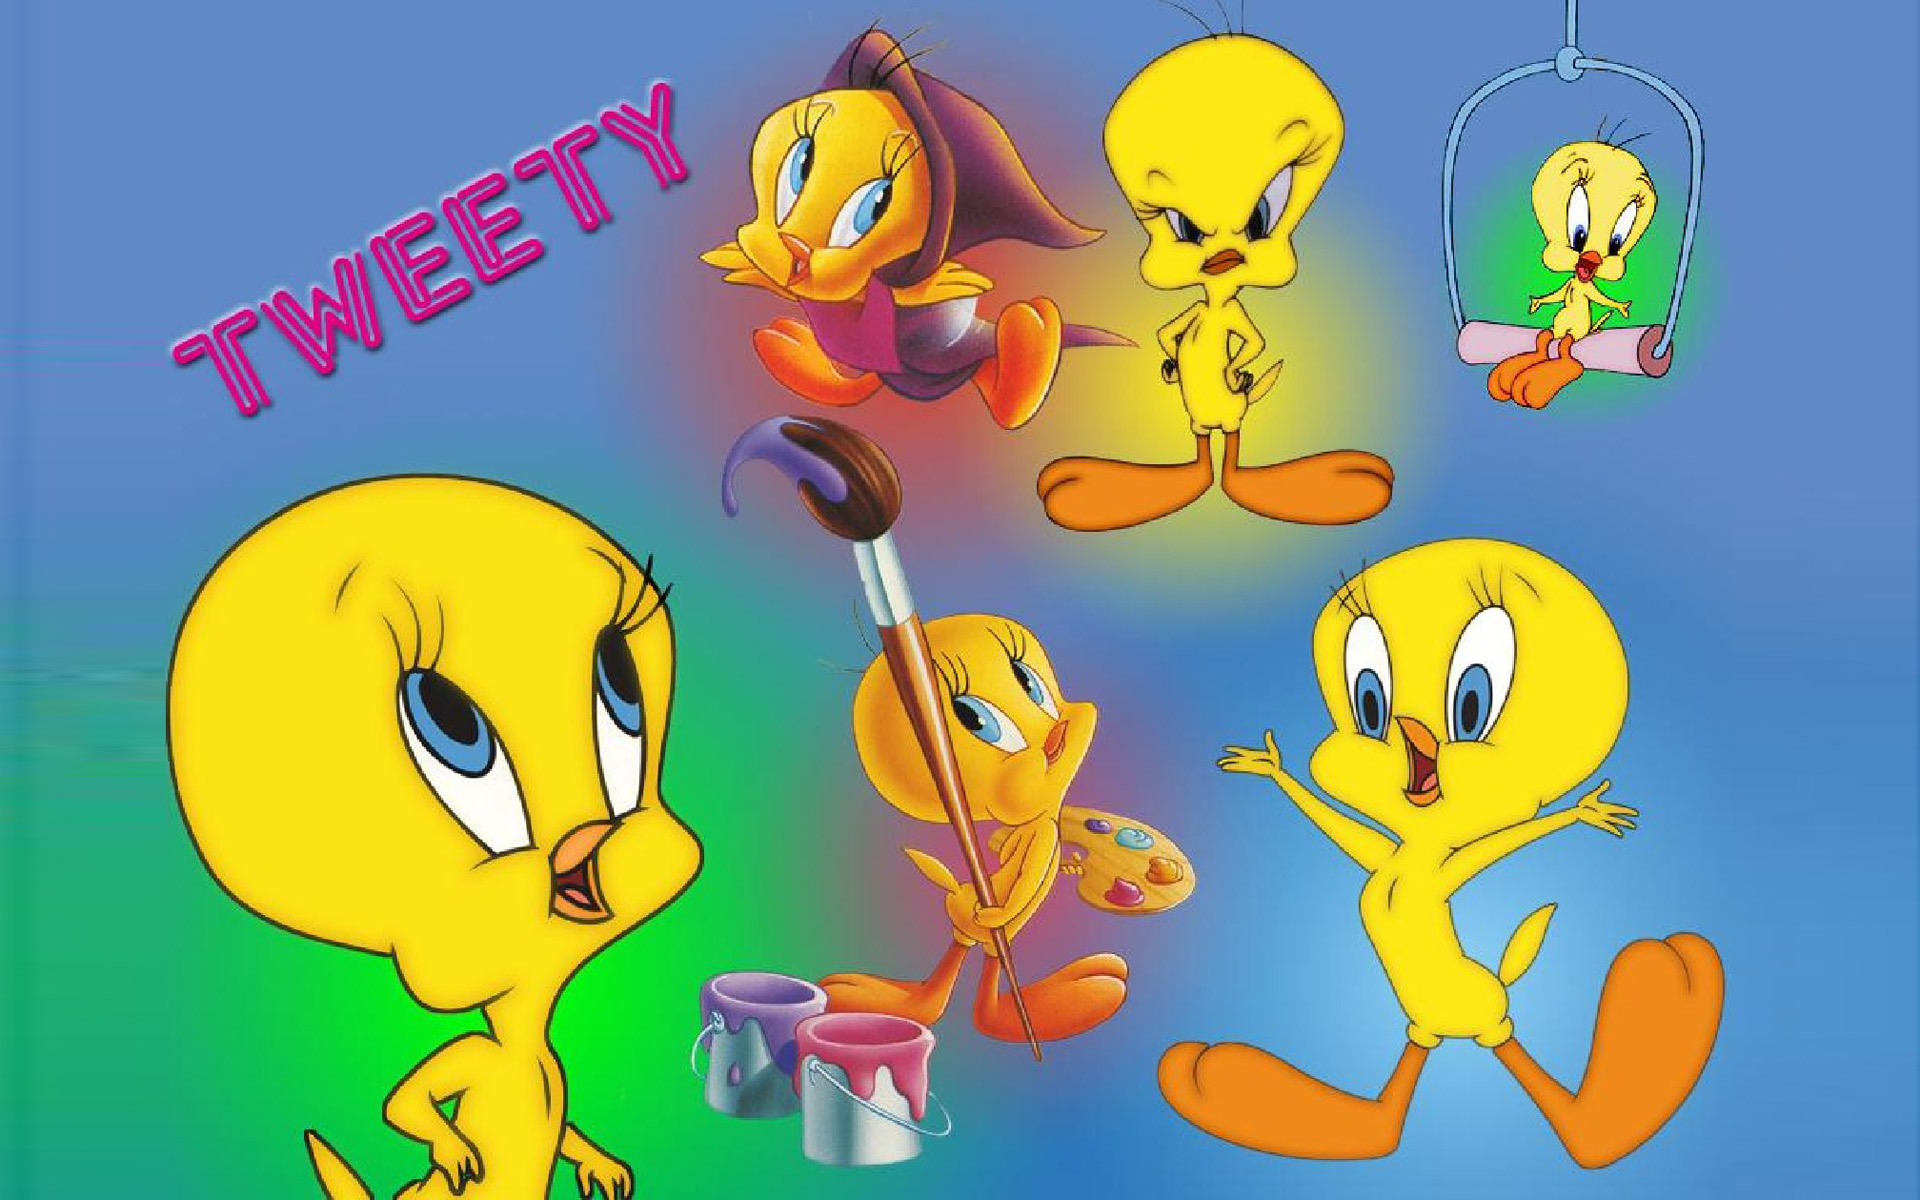 1920x1200 Tweety Bird Cartoon Hd Wallpaper For Mobile Phones Tablet And Pc :